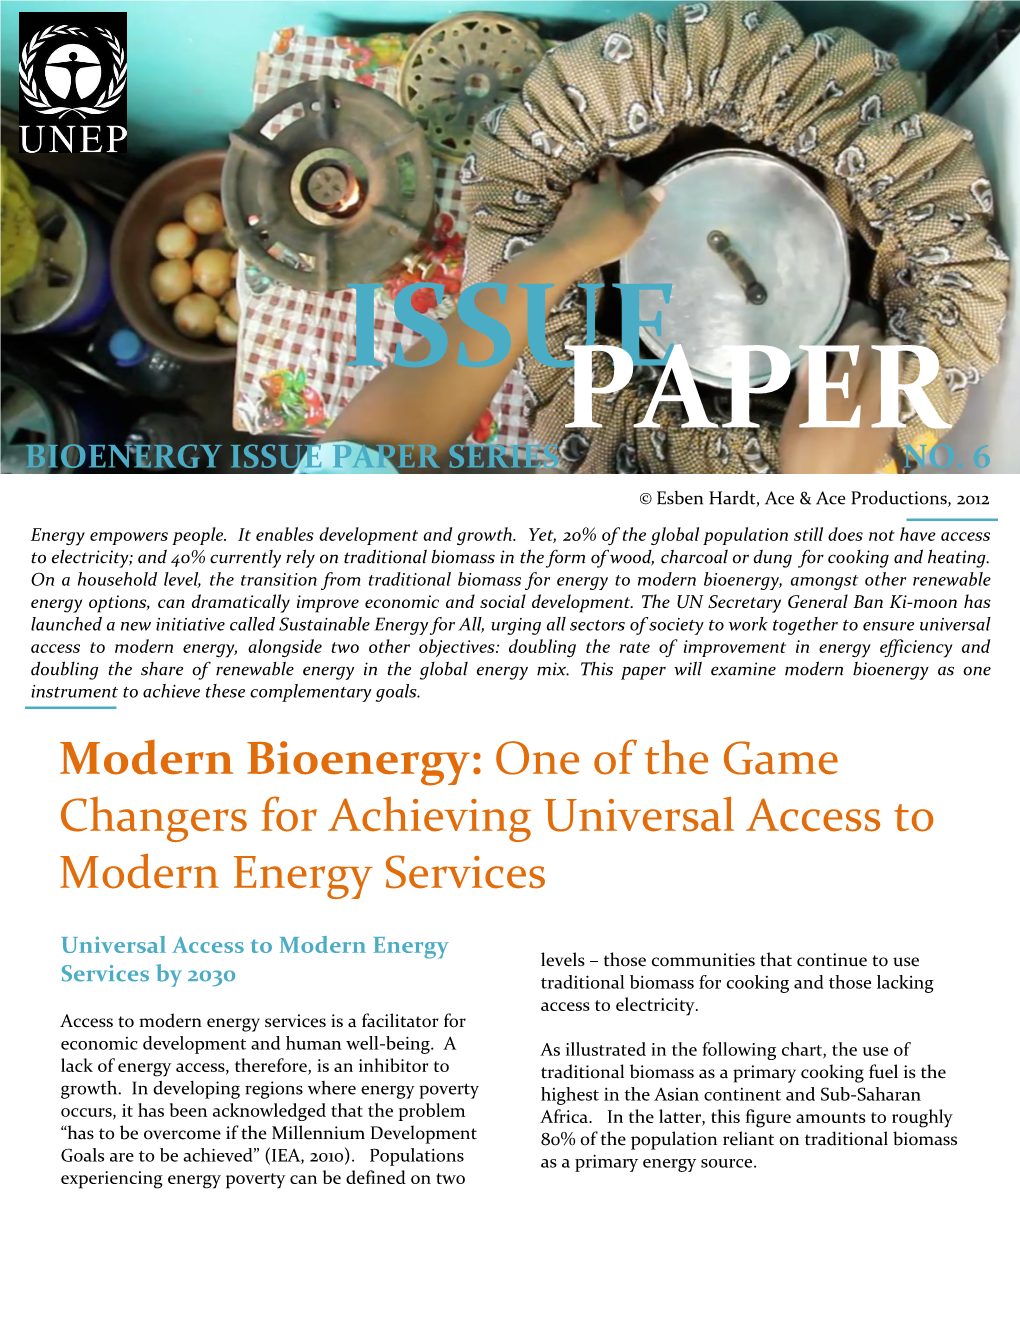 Modern Bioenergy: One of the Game Changers for Achieving Universal